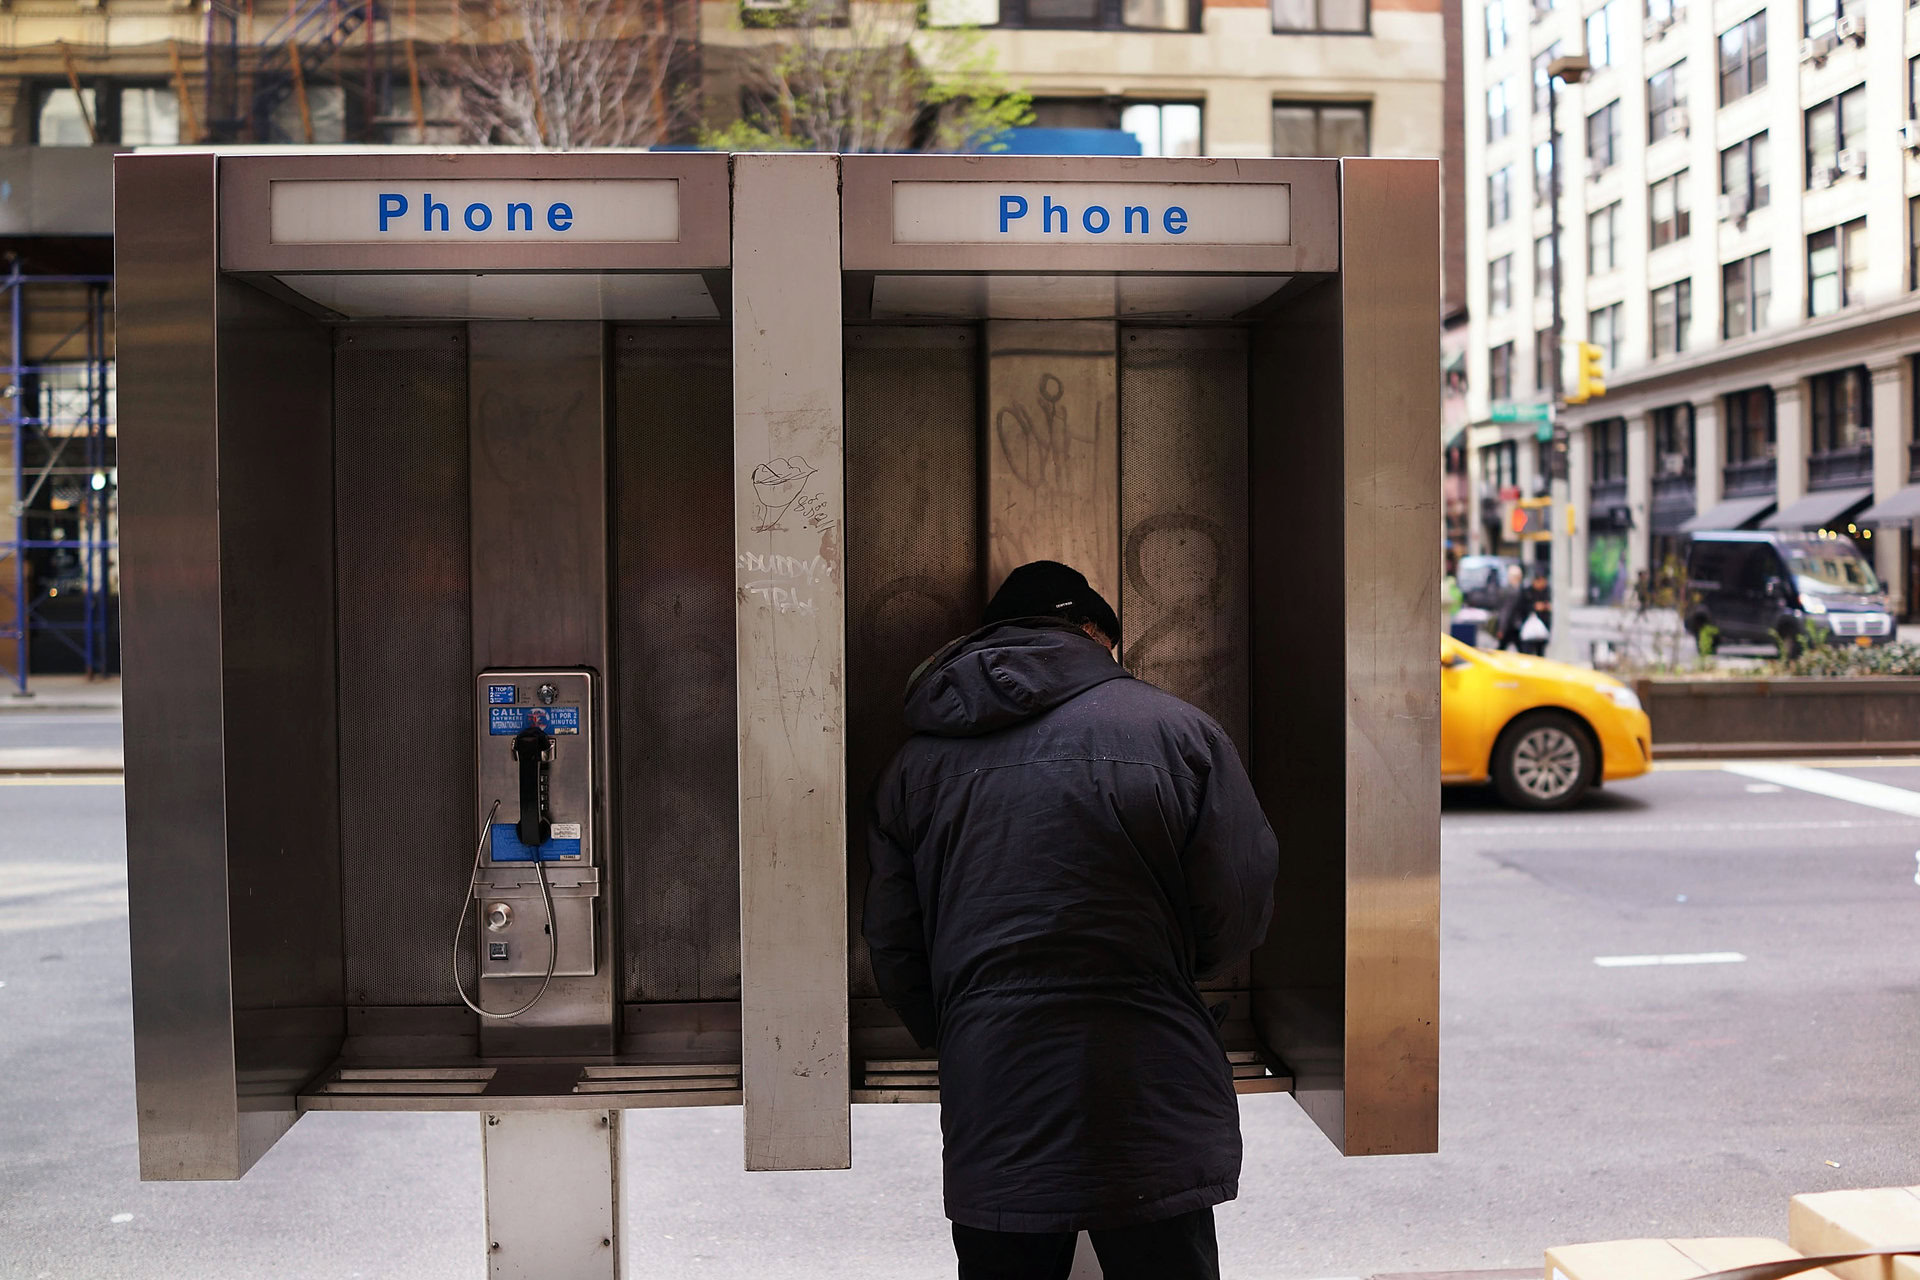 NYC Plans To Replace Pay Phones With Wifi Hotspots